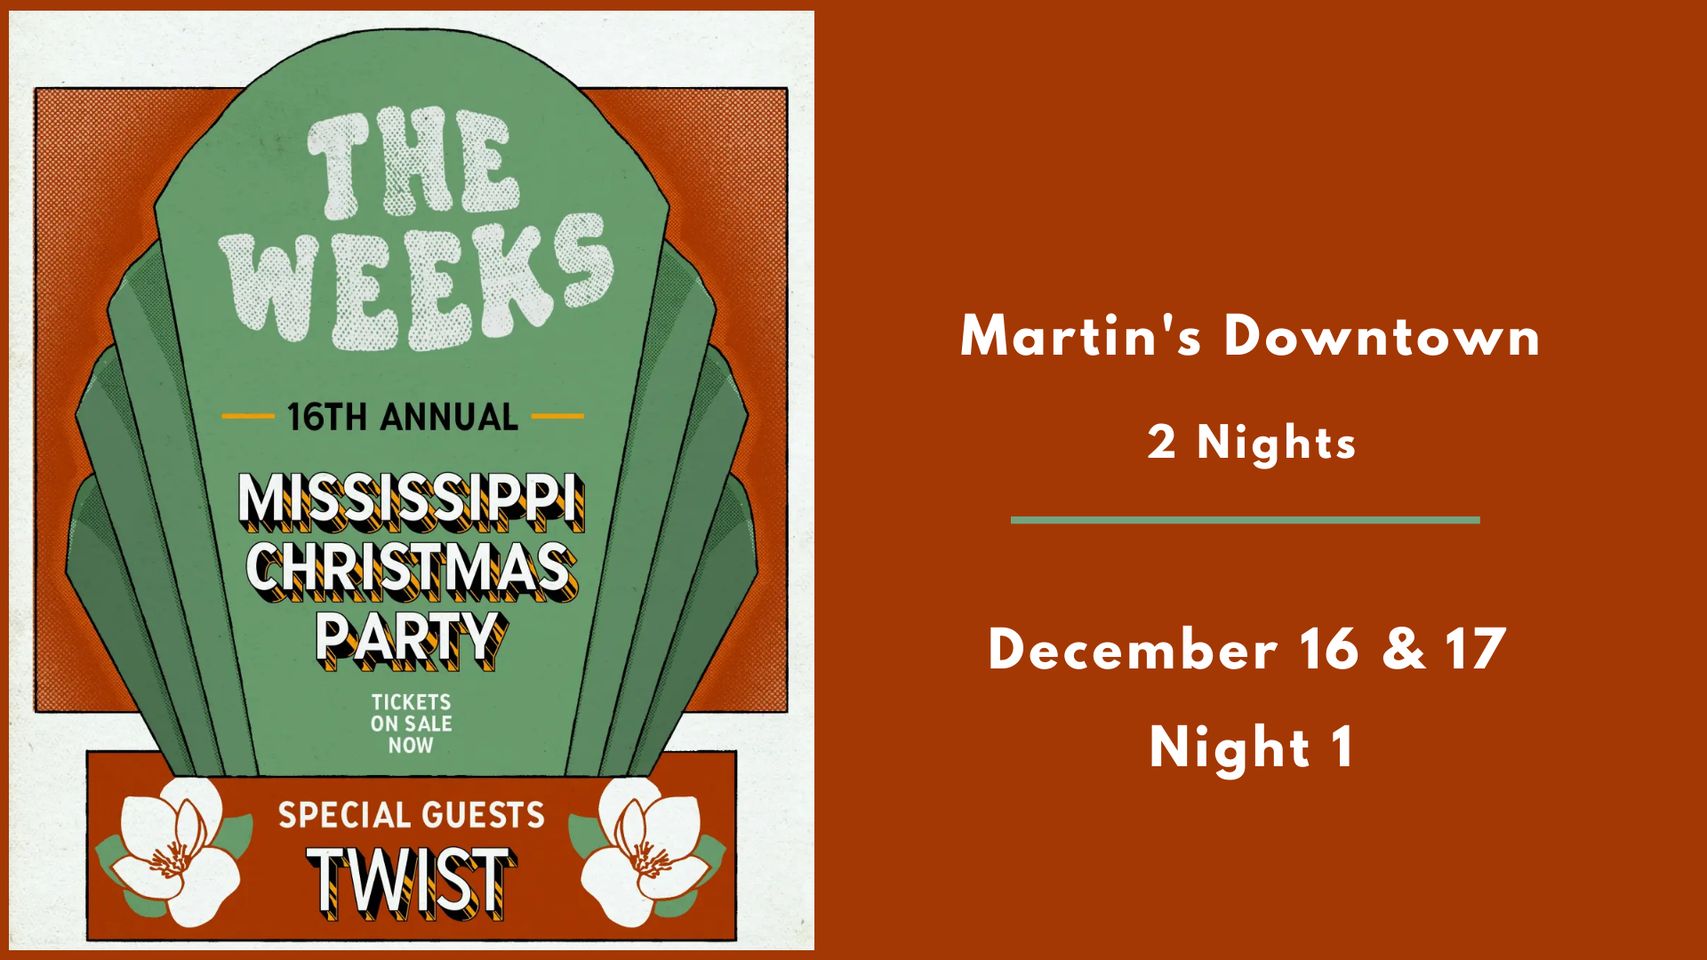 Night 1: The Weeks 16th Annual Mississippi Christmas Party with Guests Twist at Martin’s Downtown